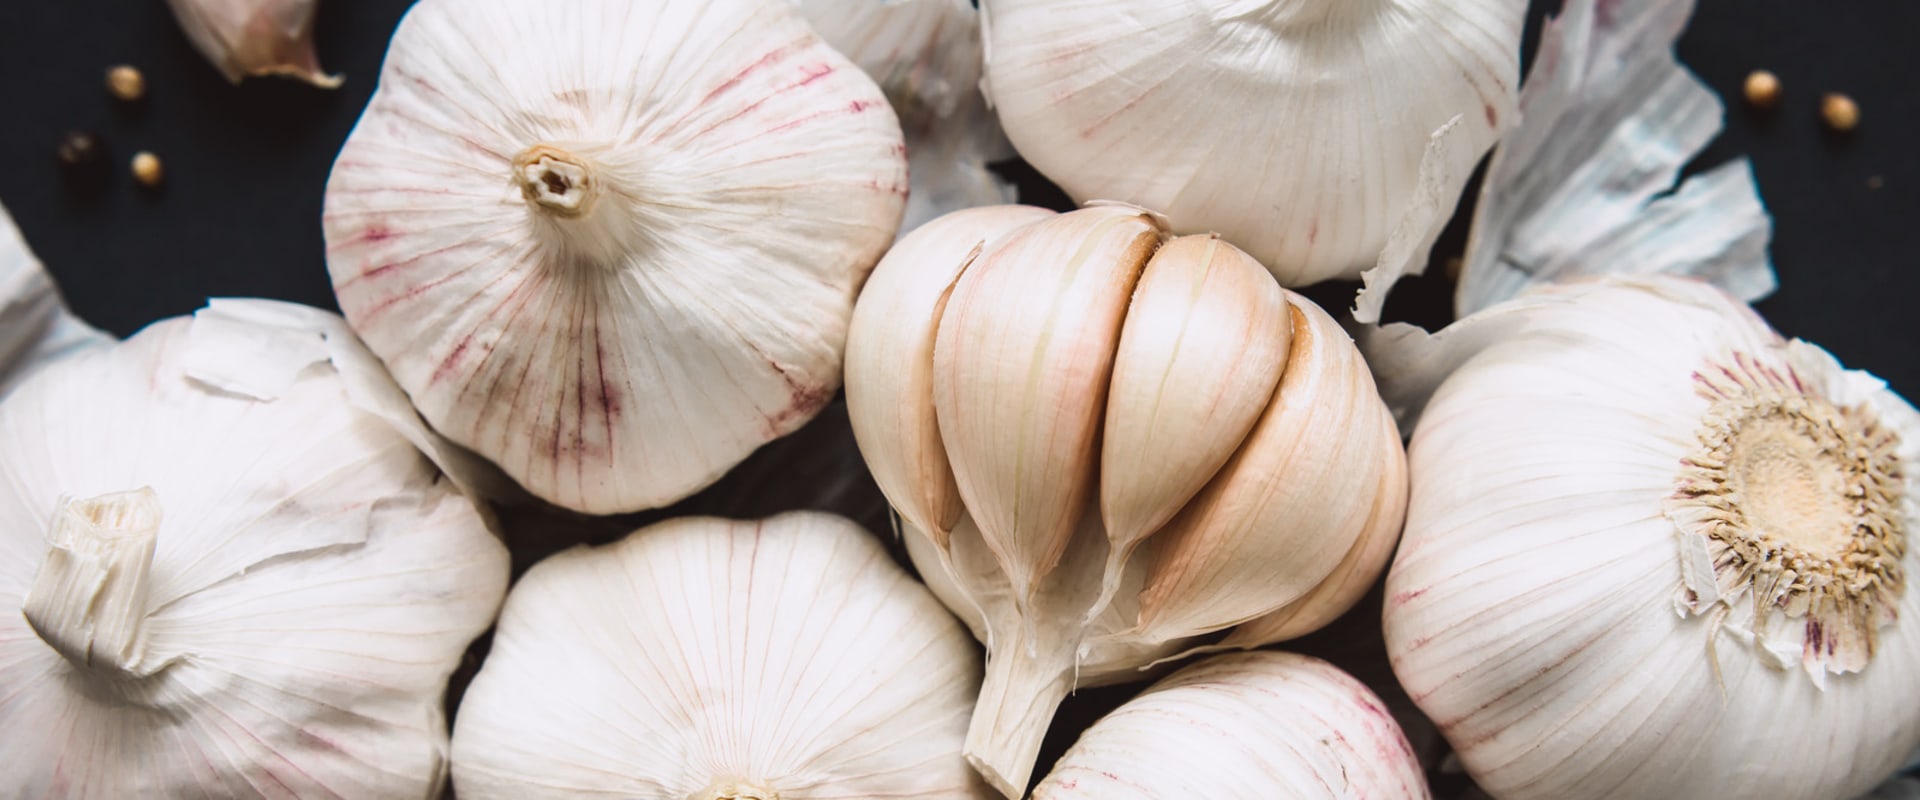 Everything You Need to Know About Garlic